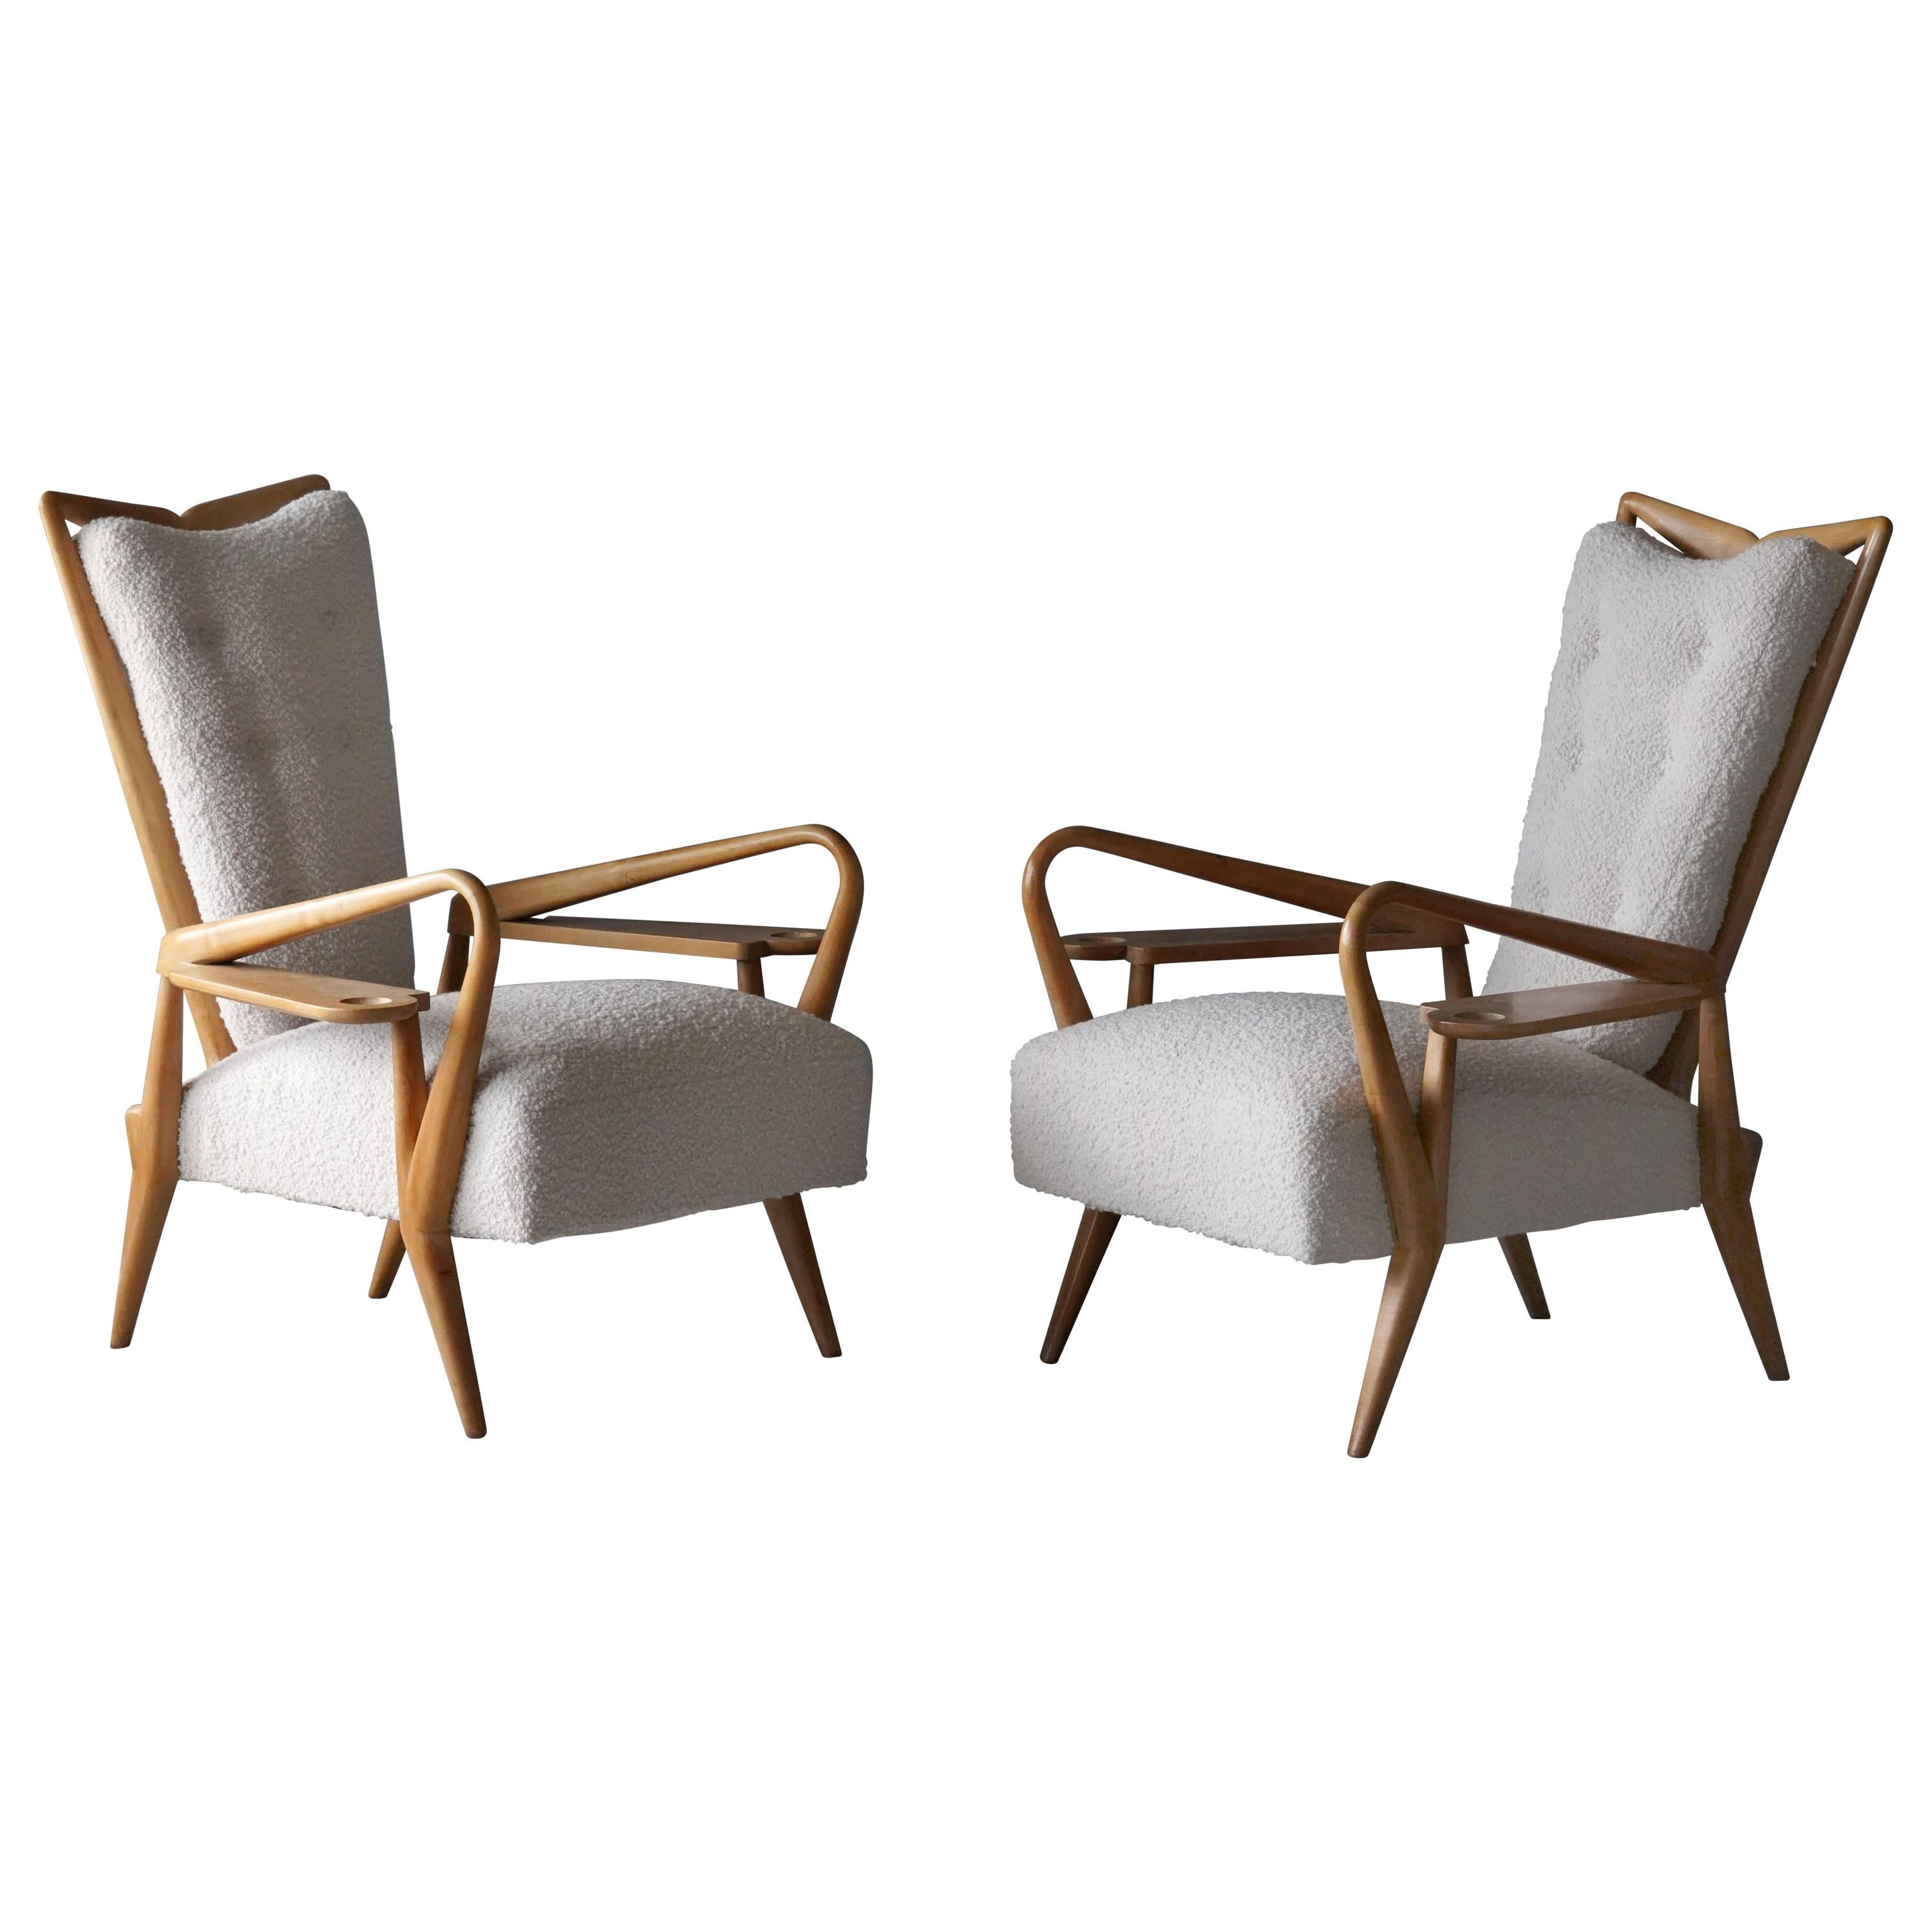 Giordano Forti 'Attribution', Pair of Lounge Chairs, Maple, Bouclé, Italy, 1940s